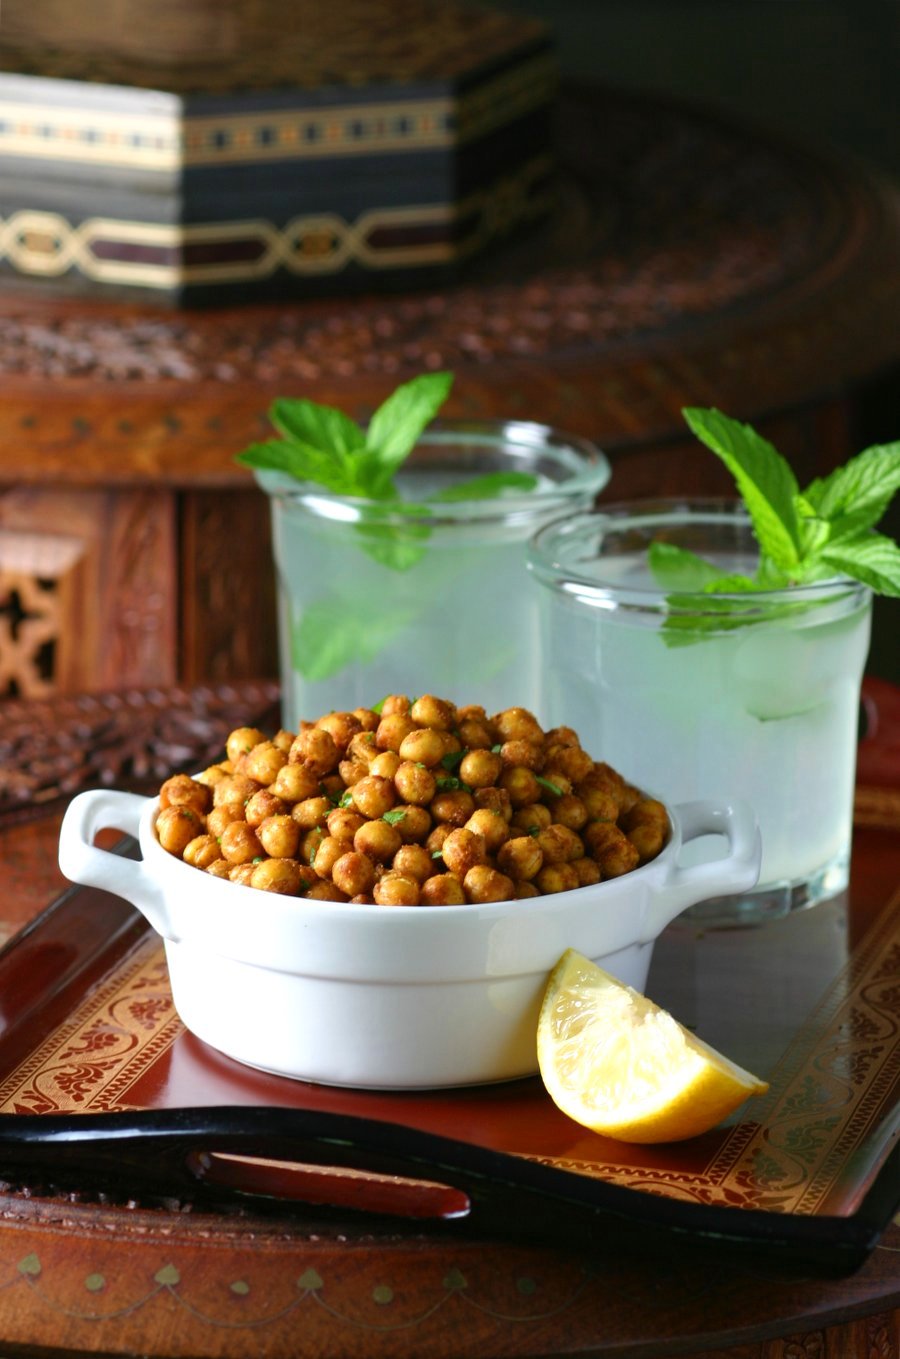 The perfect high protein snack, Falafel-Spiced Roasted Chickpeas are crunchy, spicy, and feature all the flavor of falafel with very little effort.